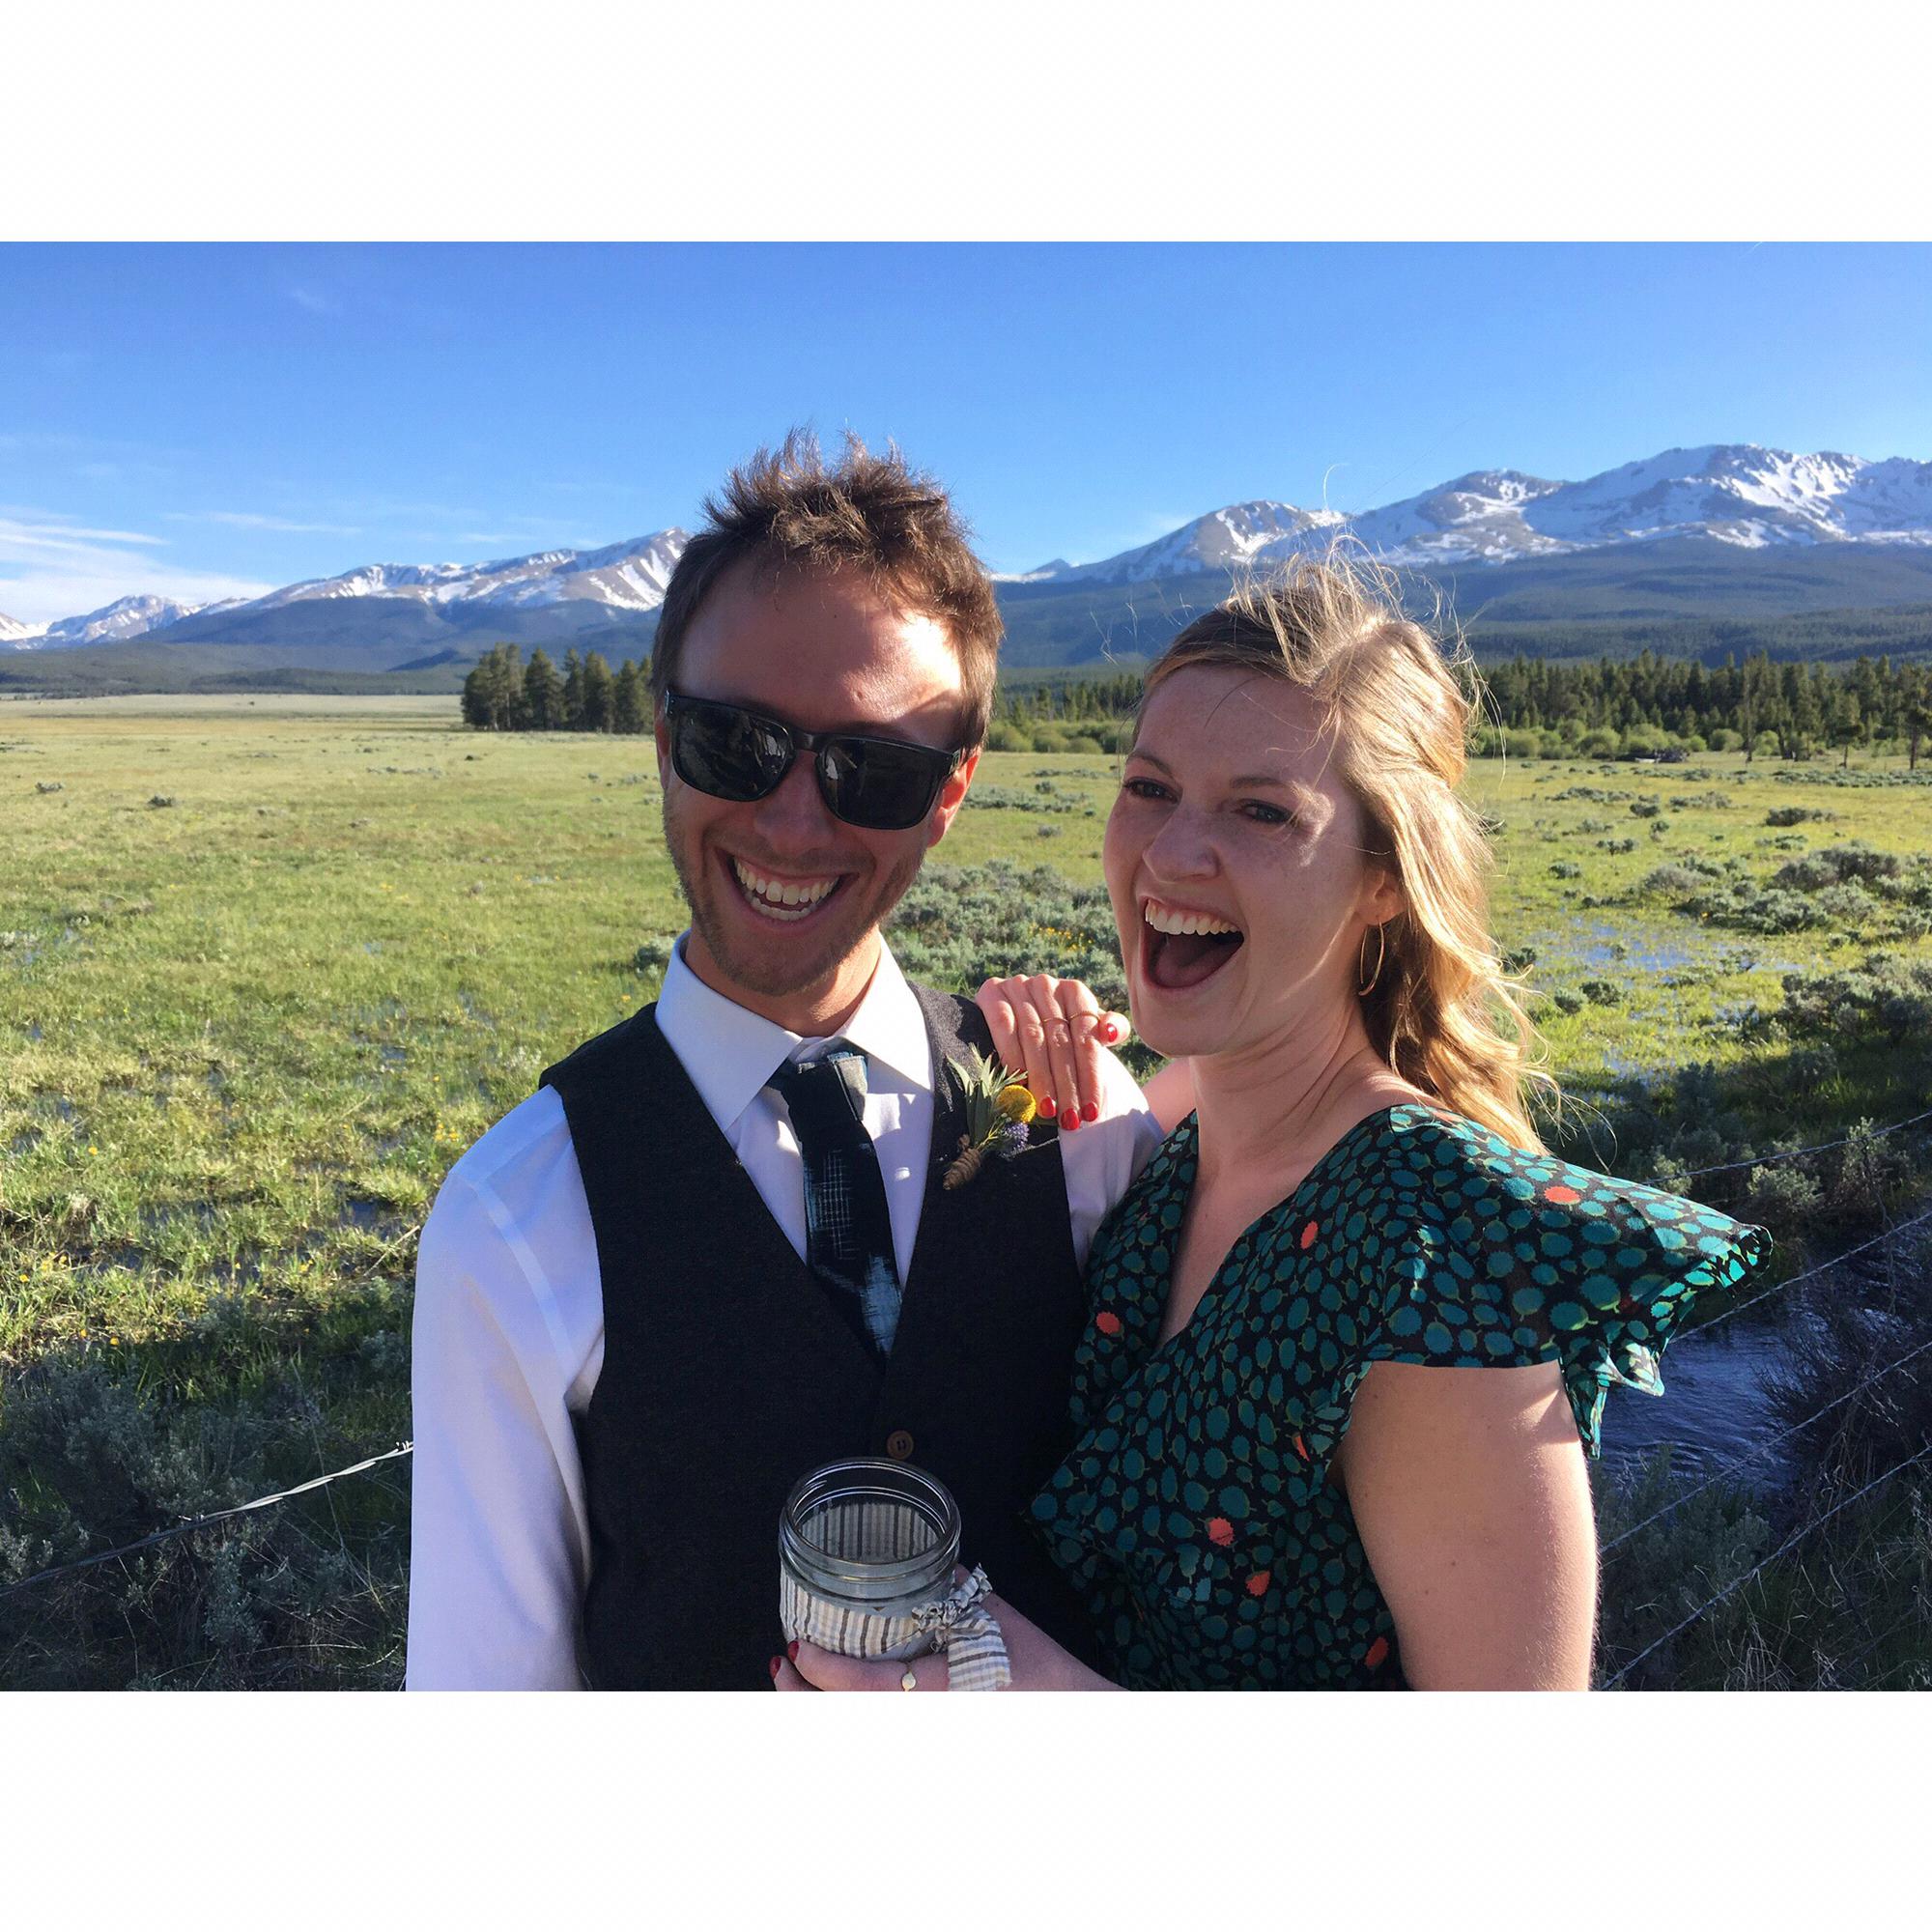 Our last summer in Leadville (2017)